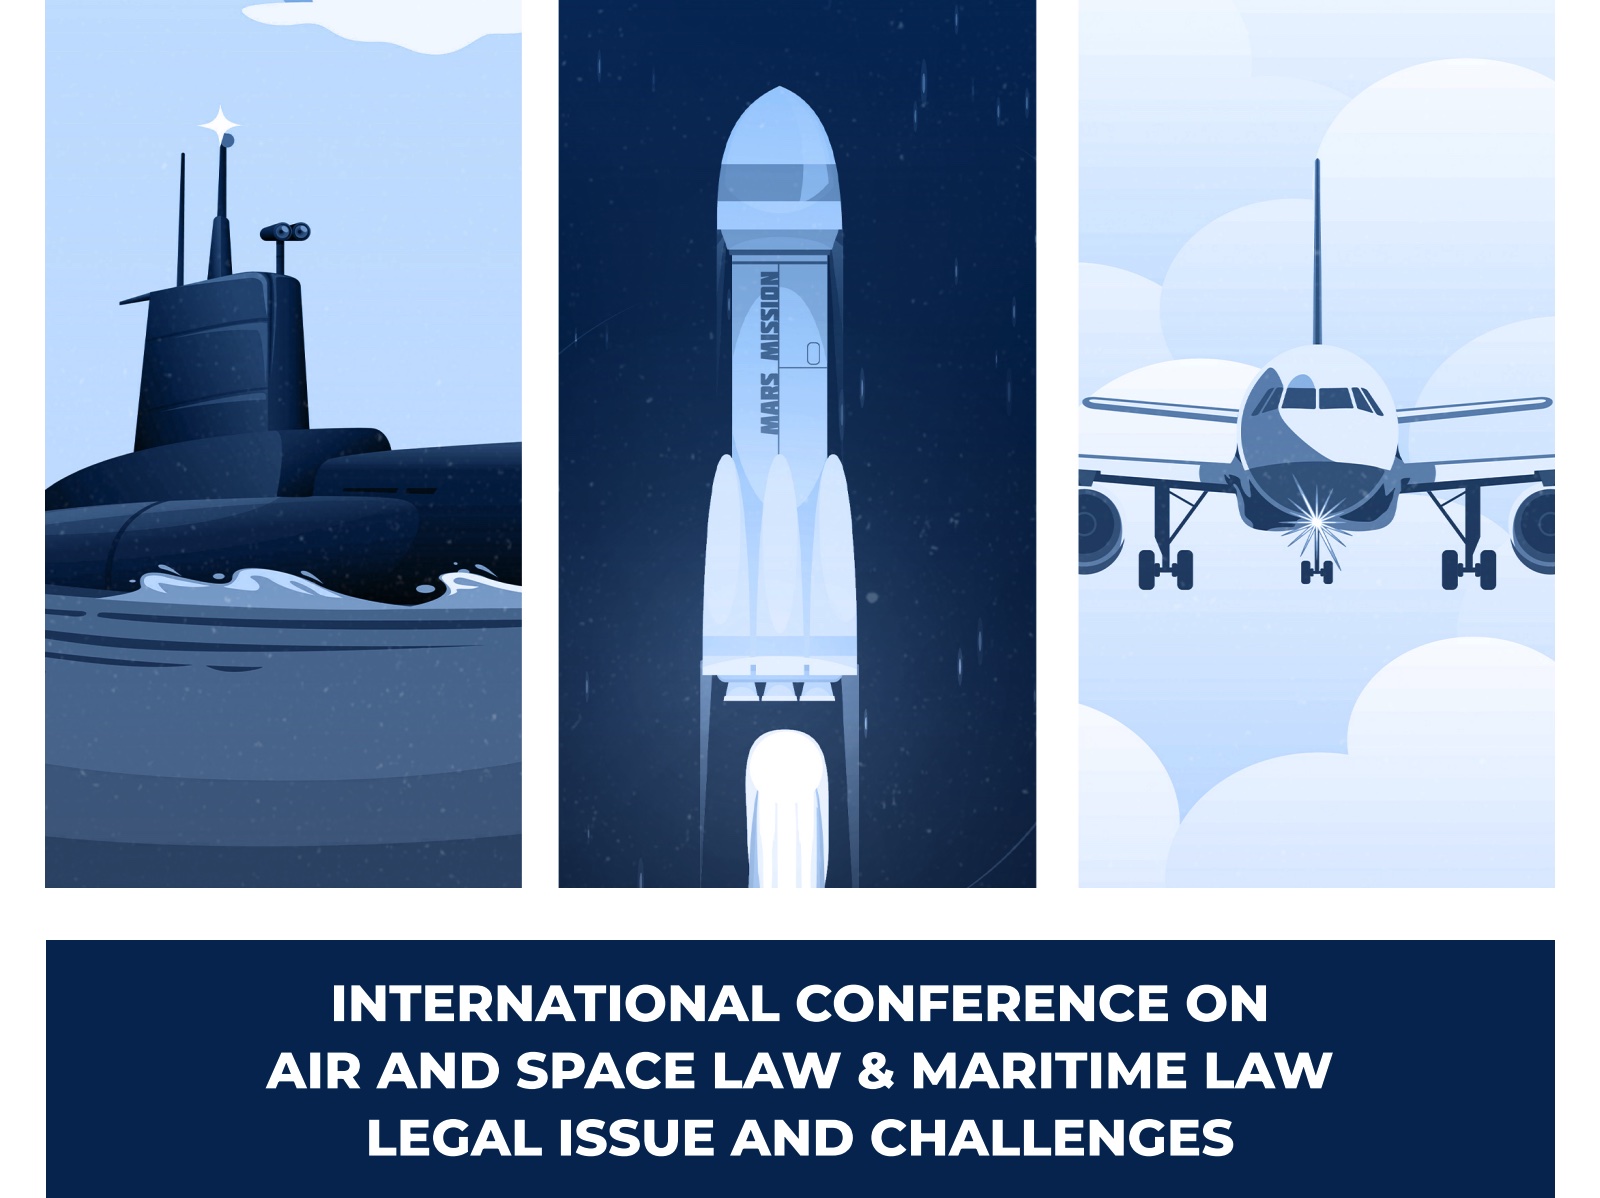 International Conference on Air Law, Space Law and Maritime Law